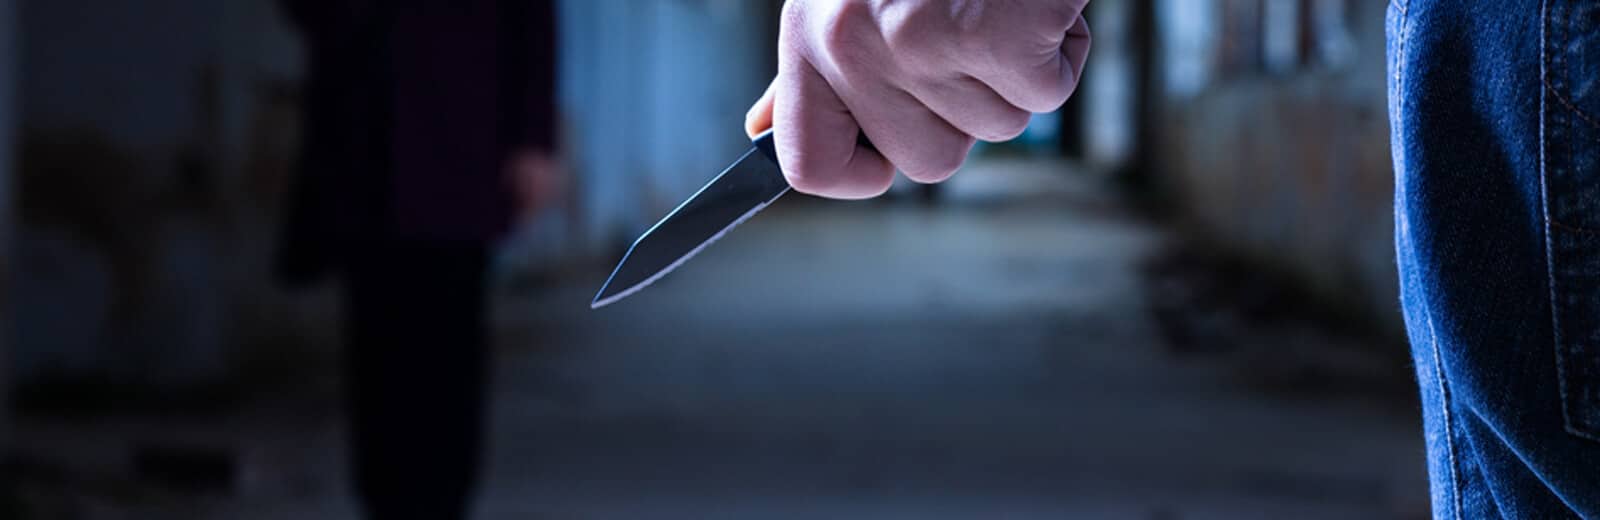 Michigan Knife Laws: Are Switchblades Legal in Michigan?